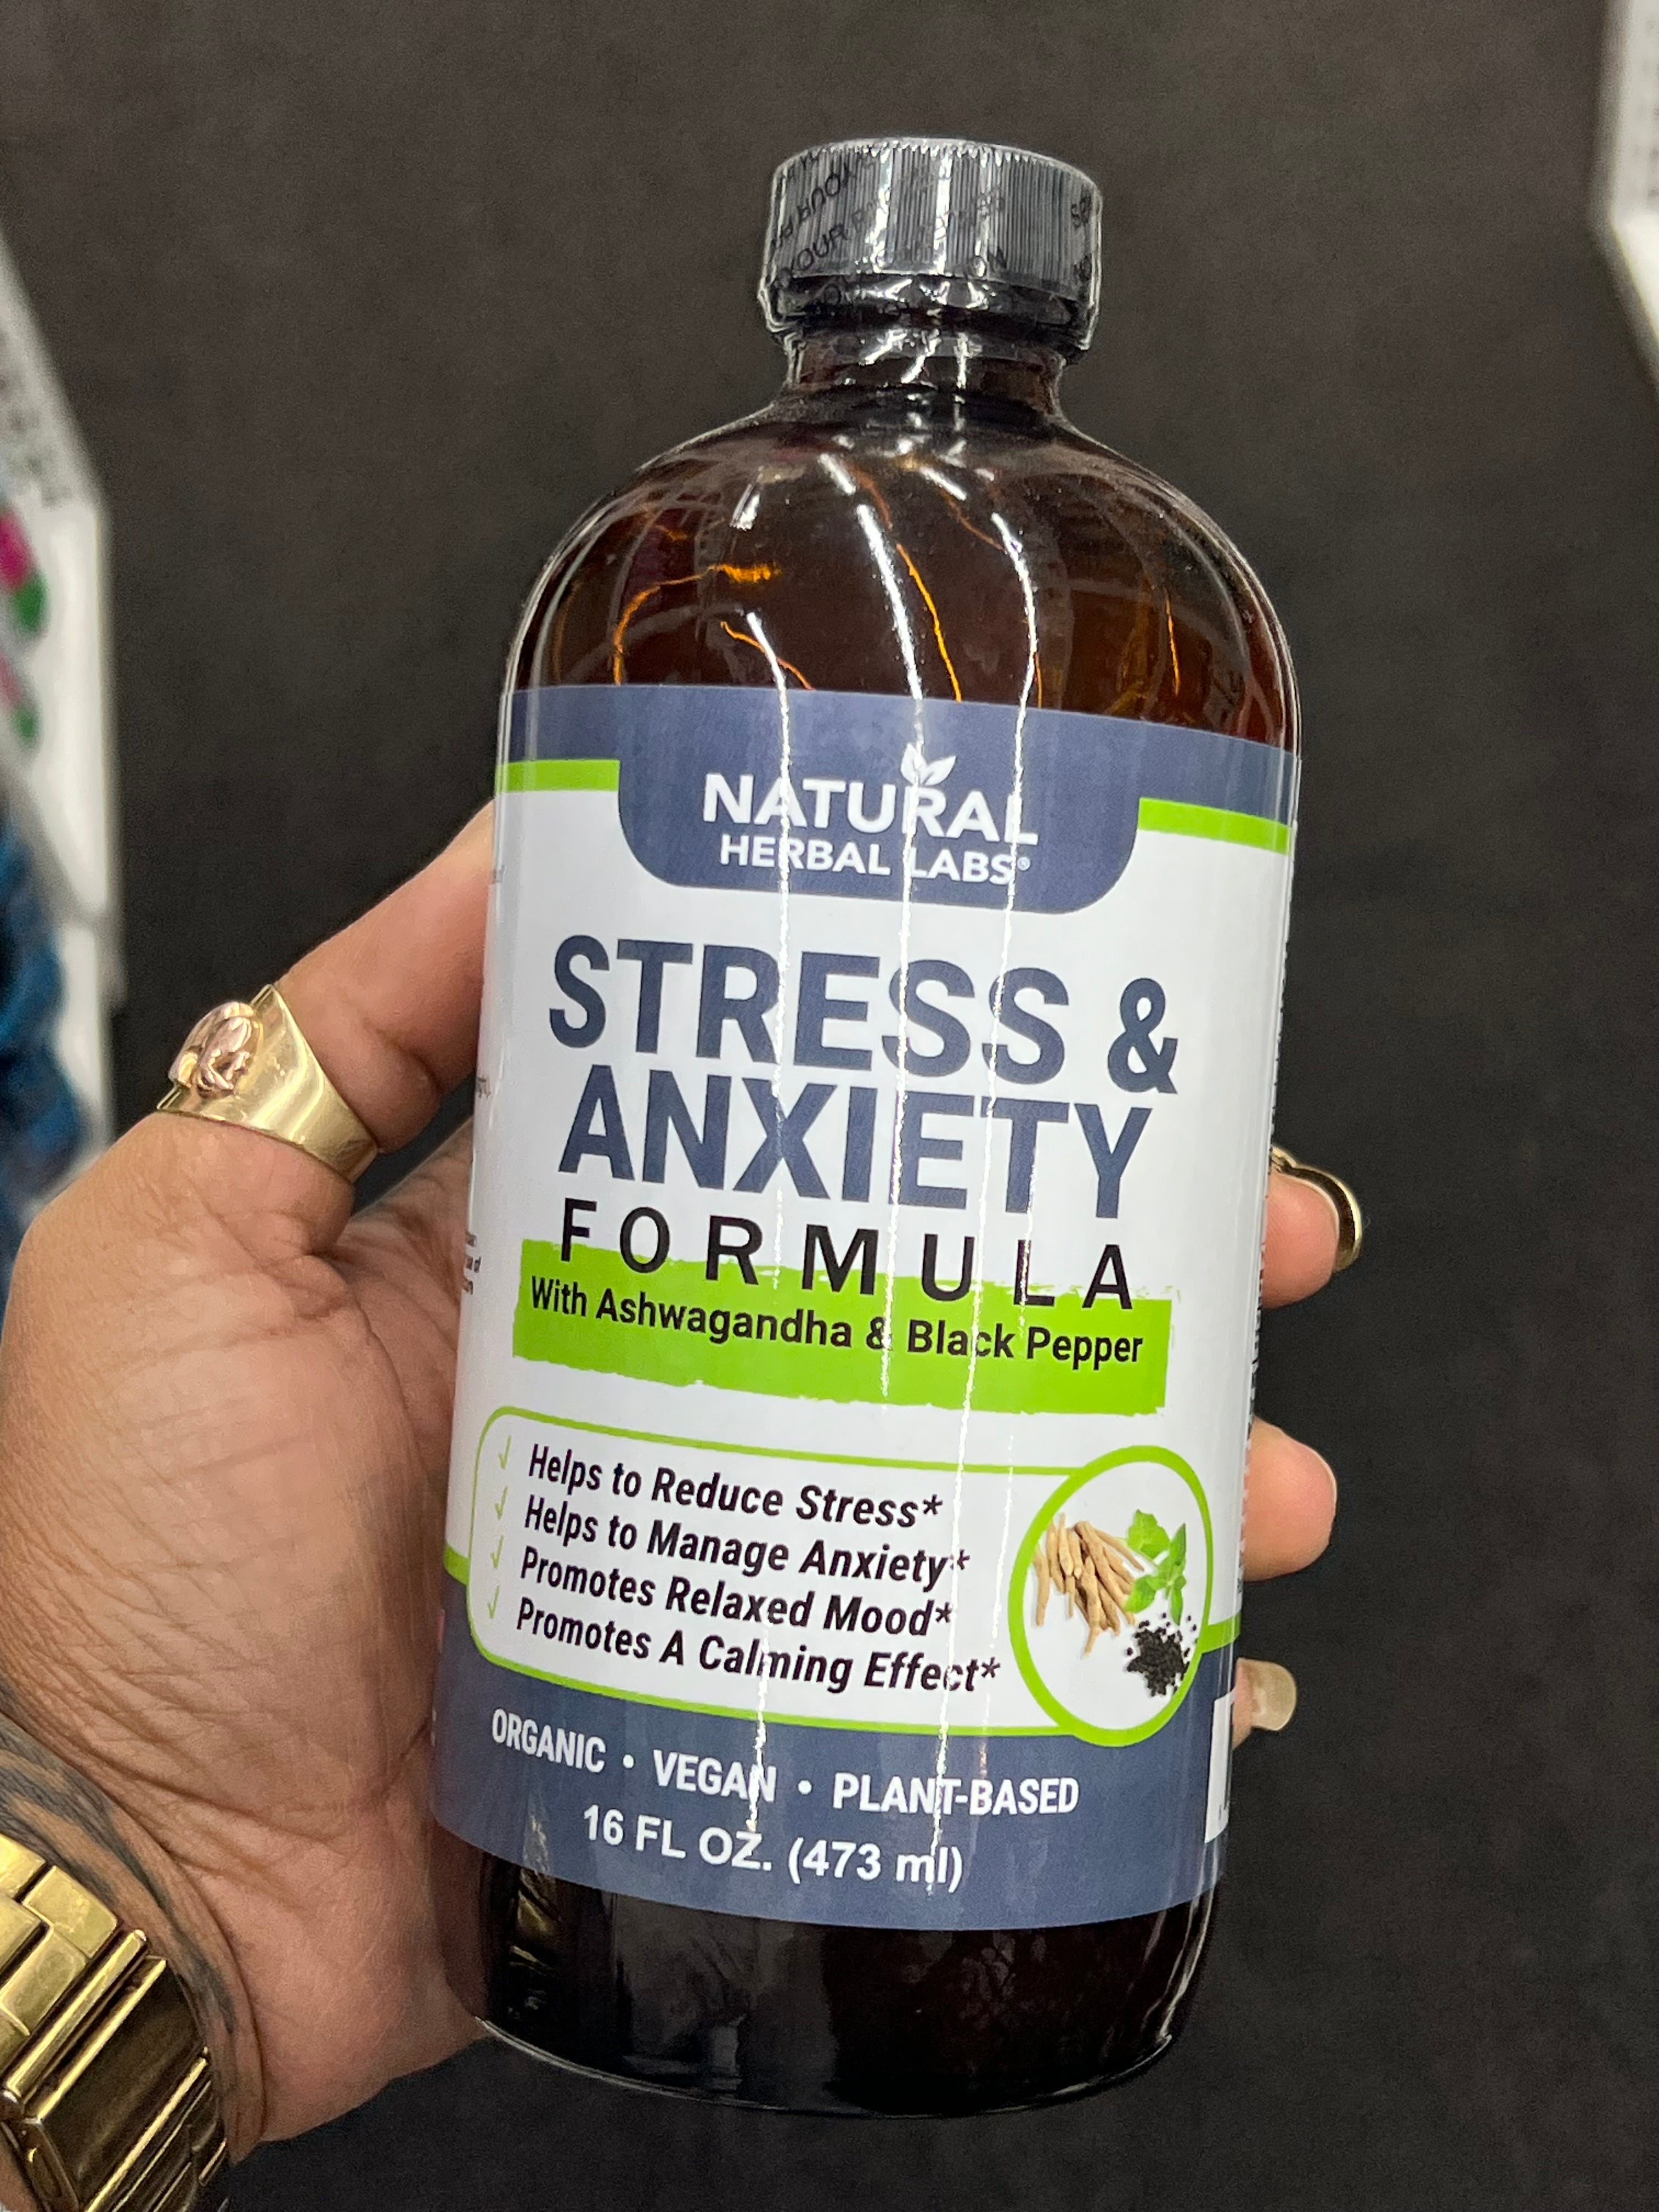 Stress & Anxiety Relief: 20+ Natural Remedies, Herbs & Stress